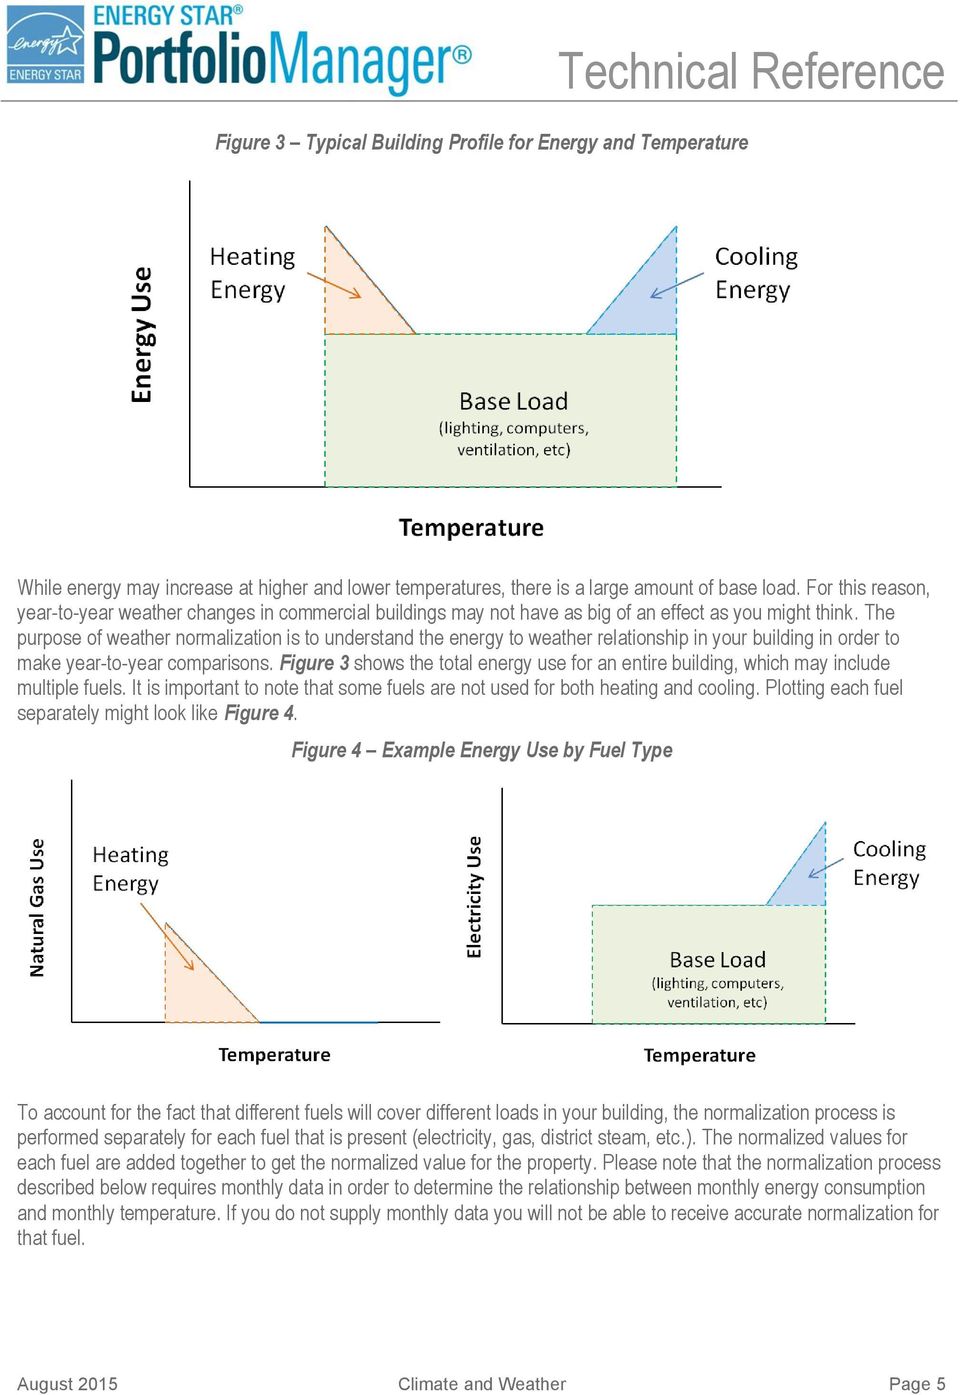 The purpose of weather normalization is to understand the energy to weather relationship in your building in order to make year-to-year comparisons.